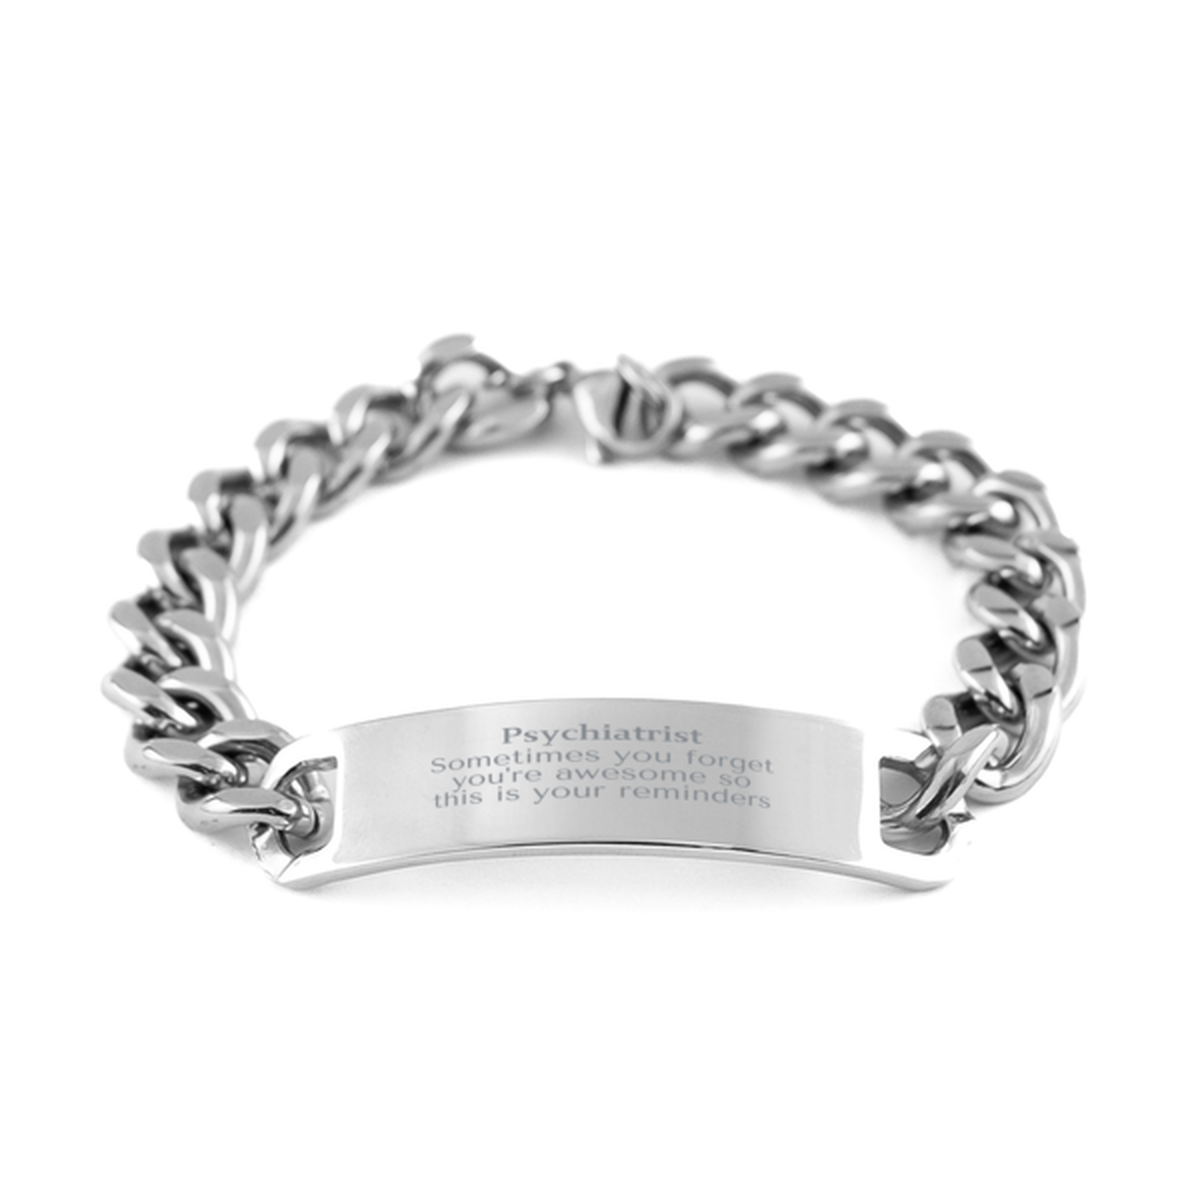 Sentimental Psychiatrist Cuban Chain Stainless Steel Bracelet, Psychiatrist Sometimes you forget you're awesome so this is your reminders, Graduation Christmas Birthday Gifts for Psychiatrist, Men, Women, Coworkers